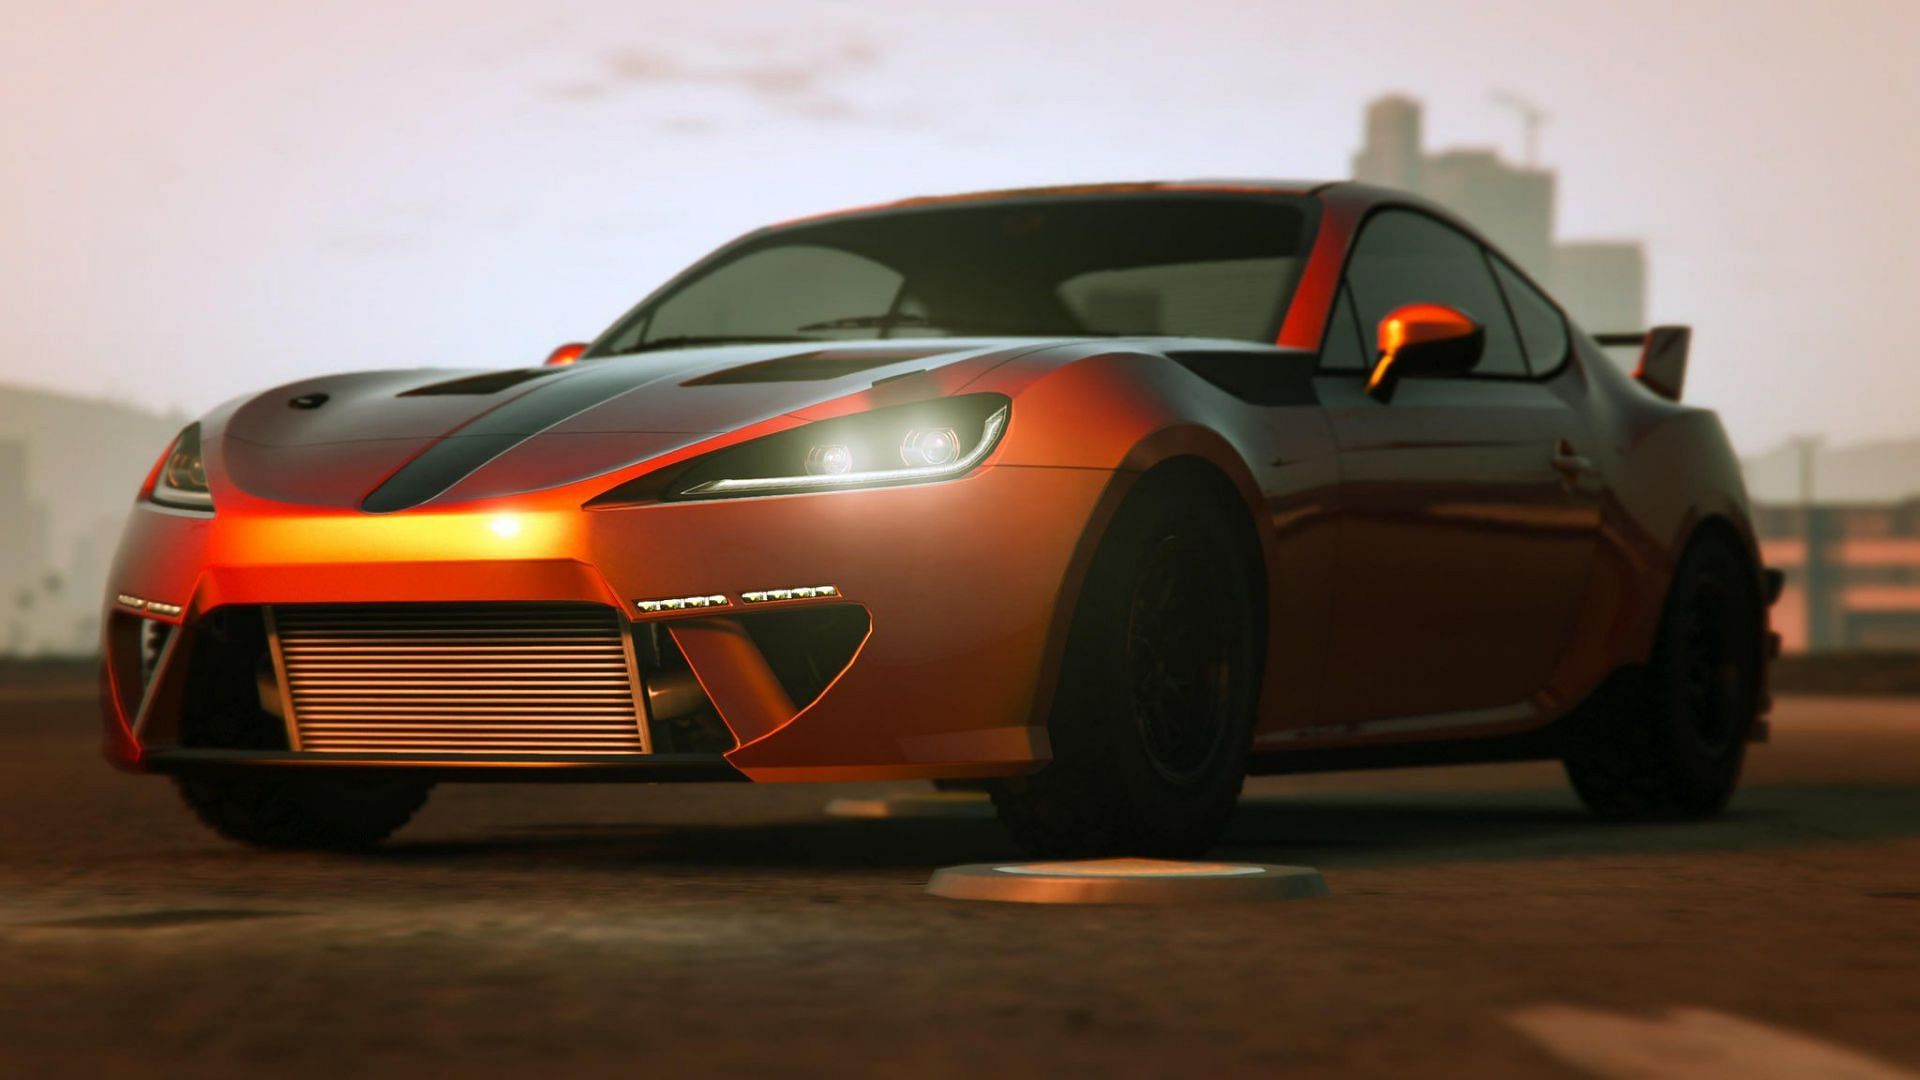 GTA Online fans have waited a long time to get a Toyota GT 86 in-game (Image via Sean Reimer/Twitter)